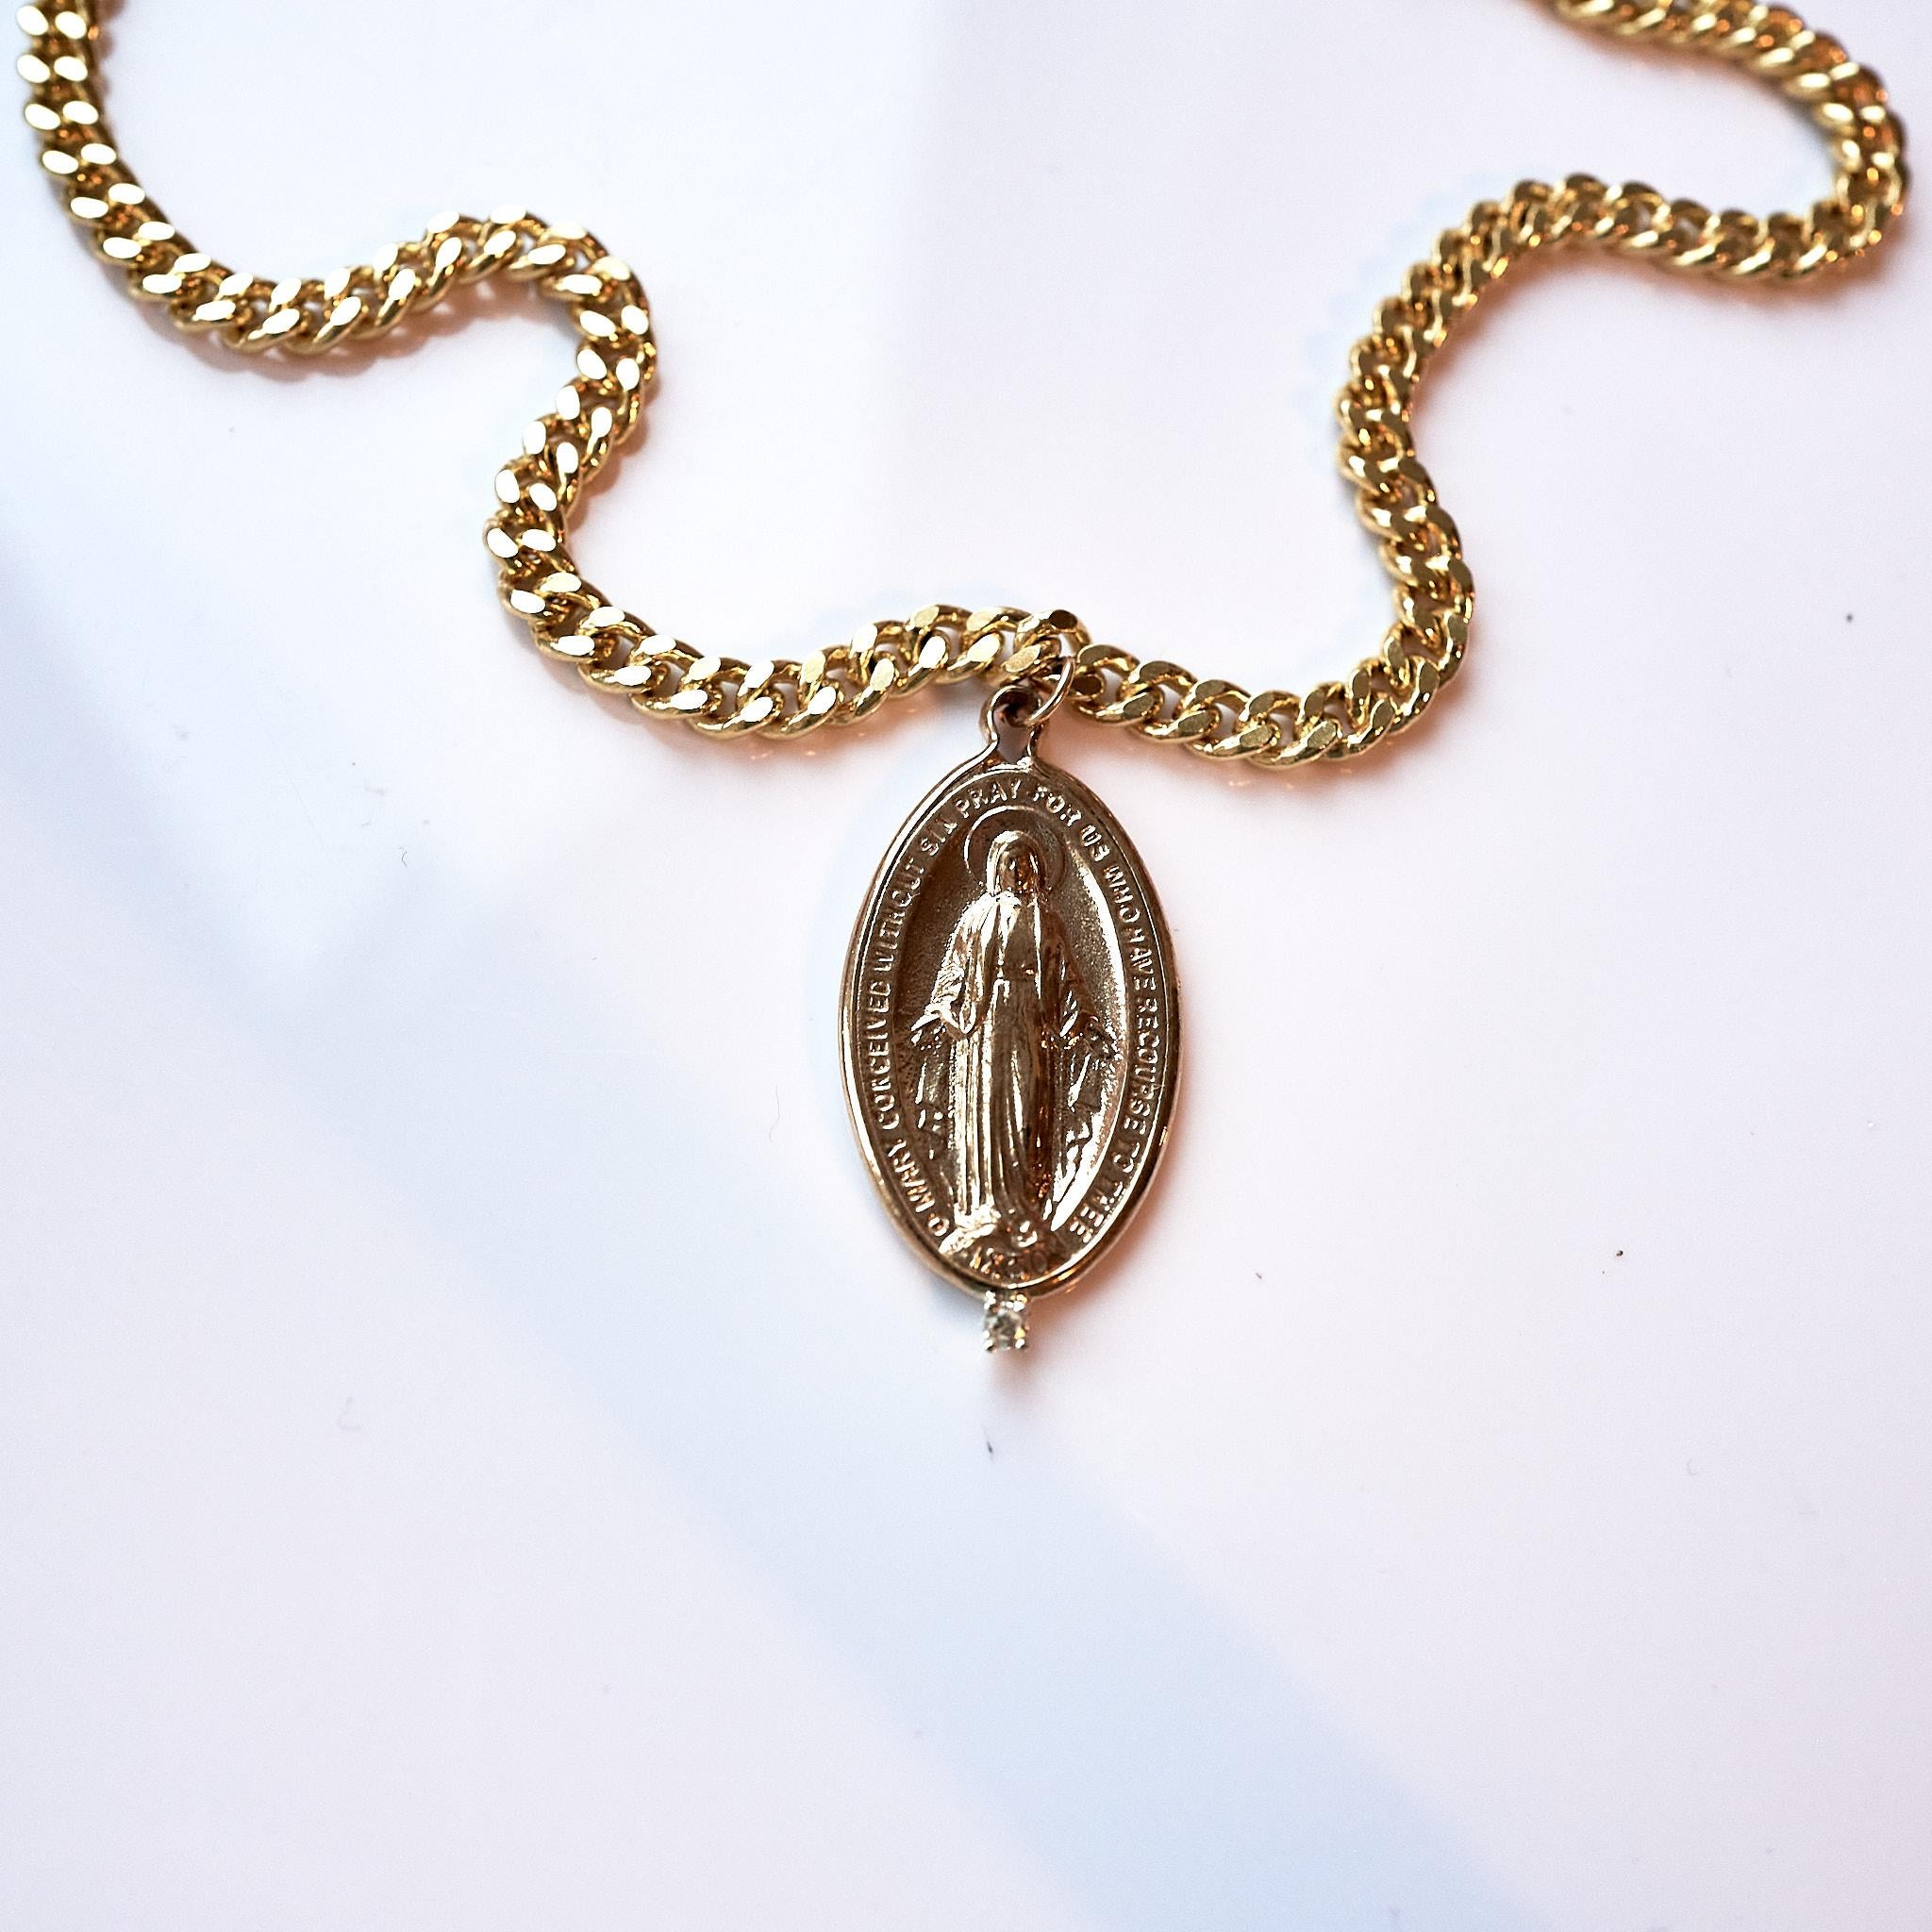 White Diamond Medal Virgin Mary Oval Medal Chain Necklace J Dauphin For Sale 4